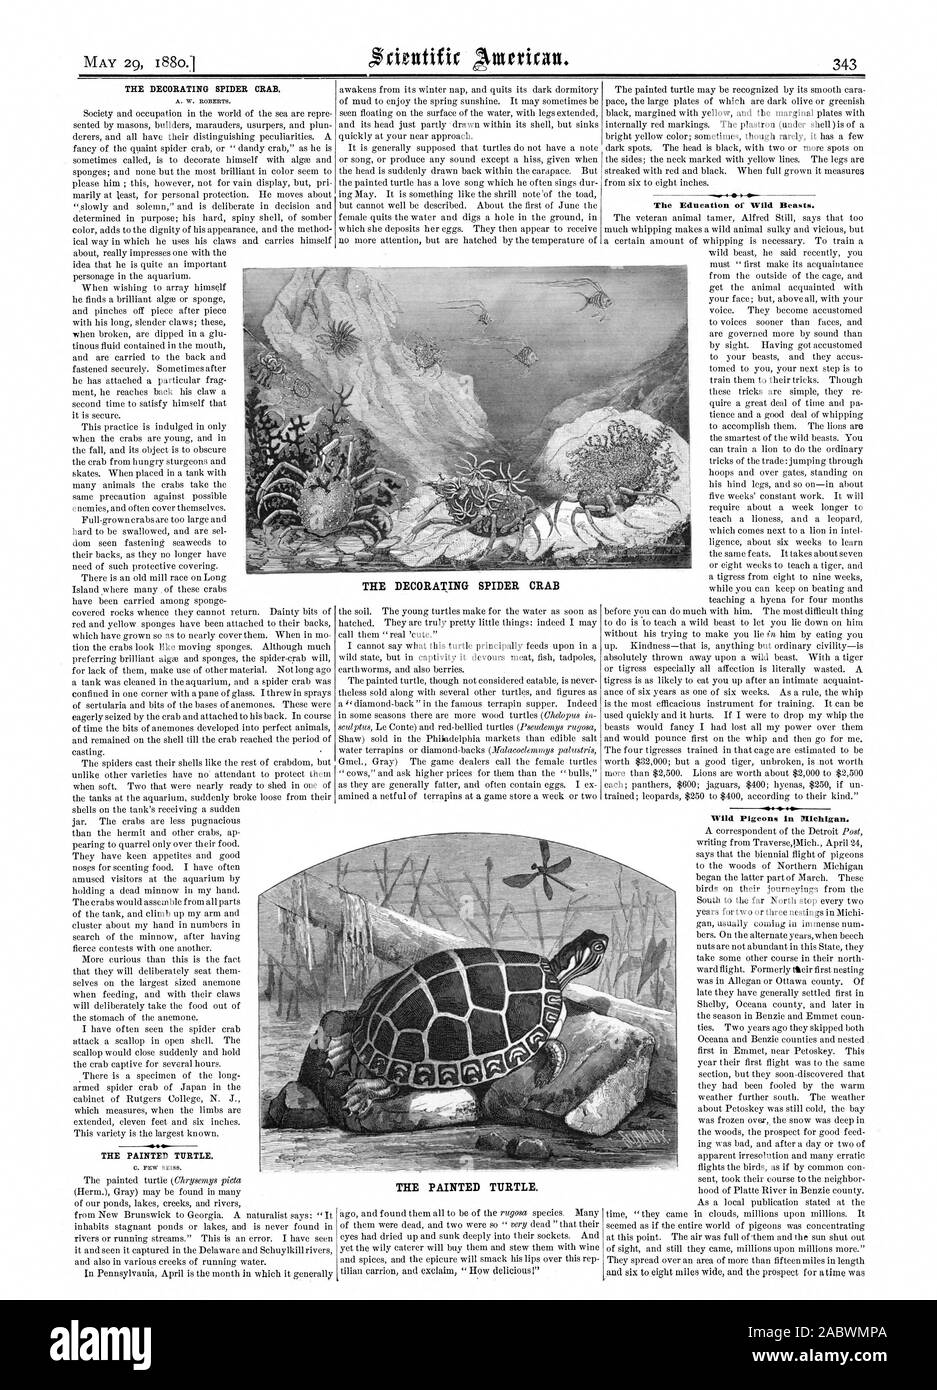 THE DECORATING SPIDER CRAB. THE PAINTED TURTLE. The Education of Wild Beasts. Wild Pigeons in Michigan. THE DECORATING SPIDER CRAB THE PAINTED TURTLE., scientific american, 1880-05-29 Stock Photo